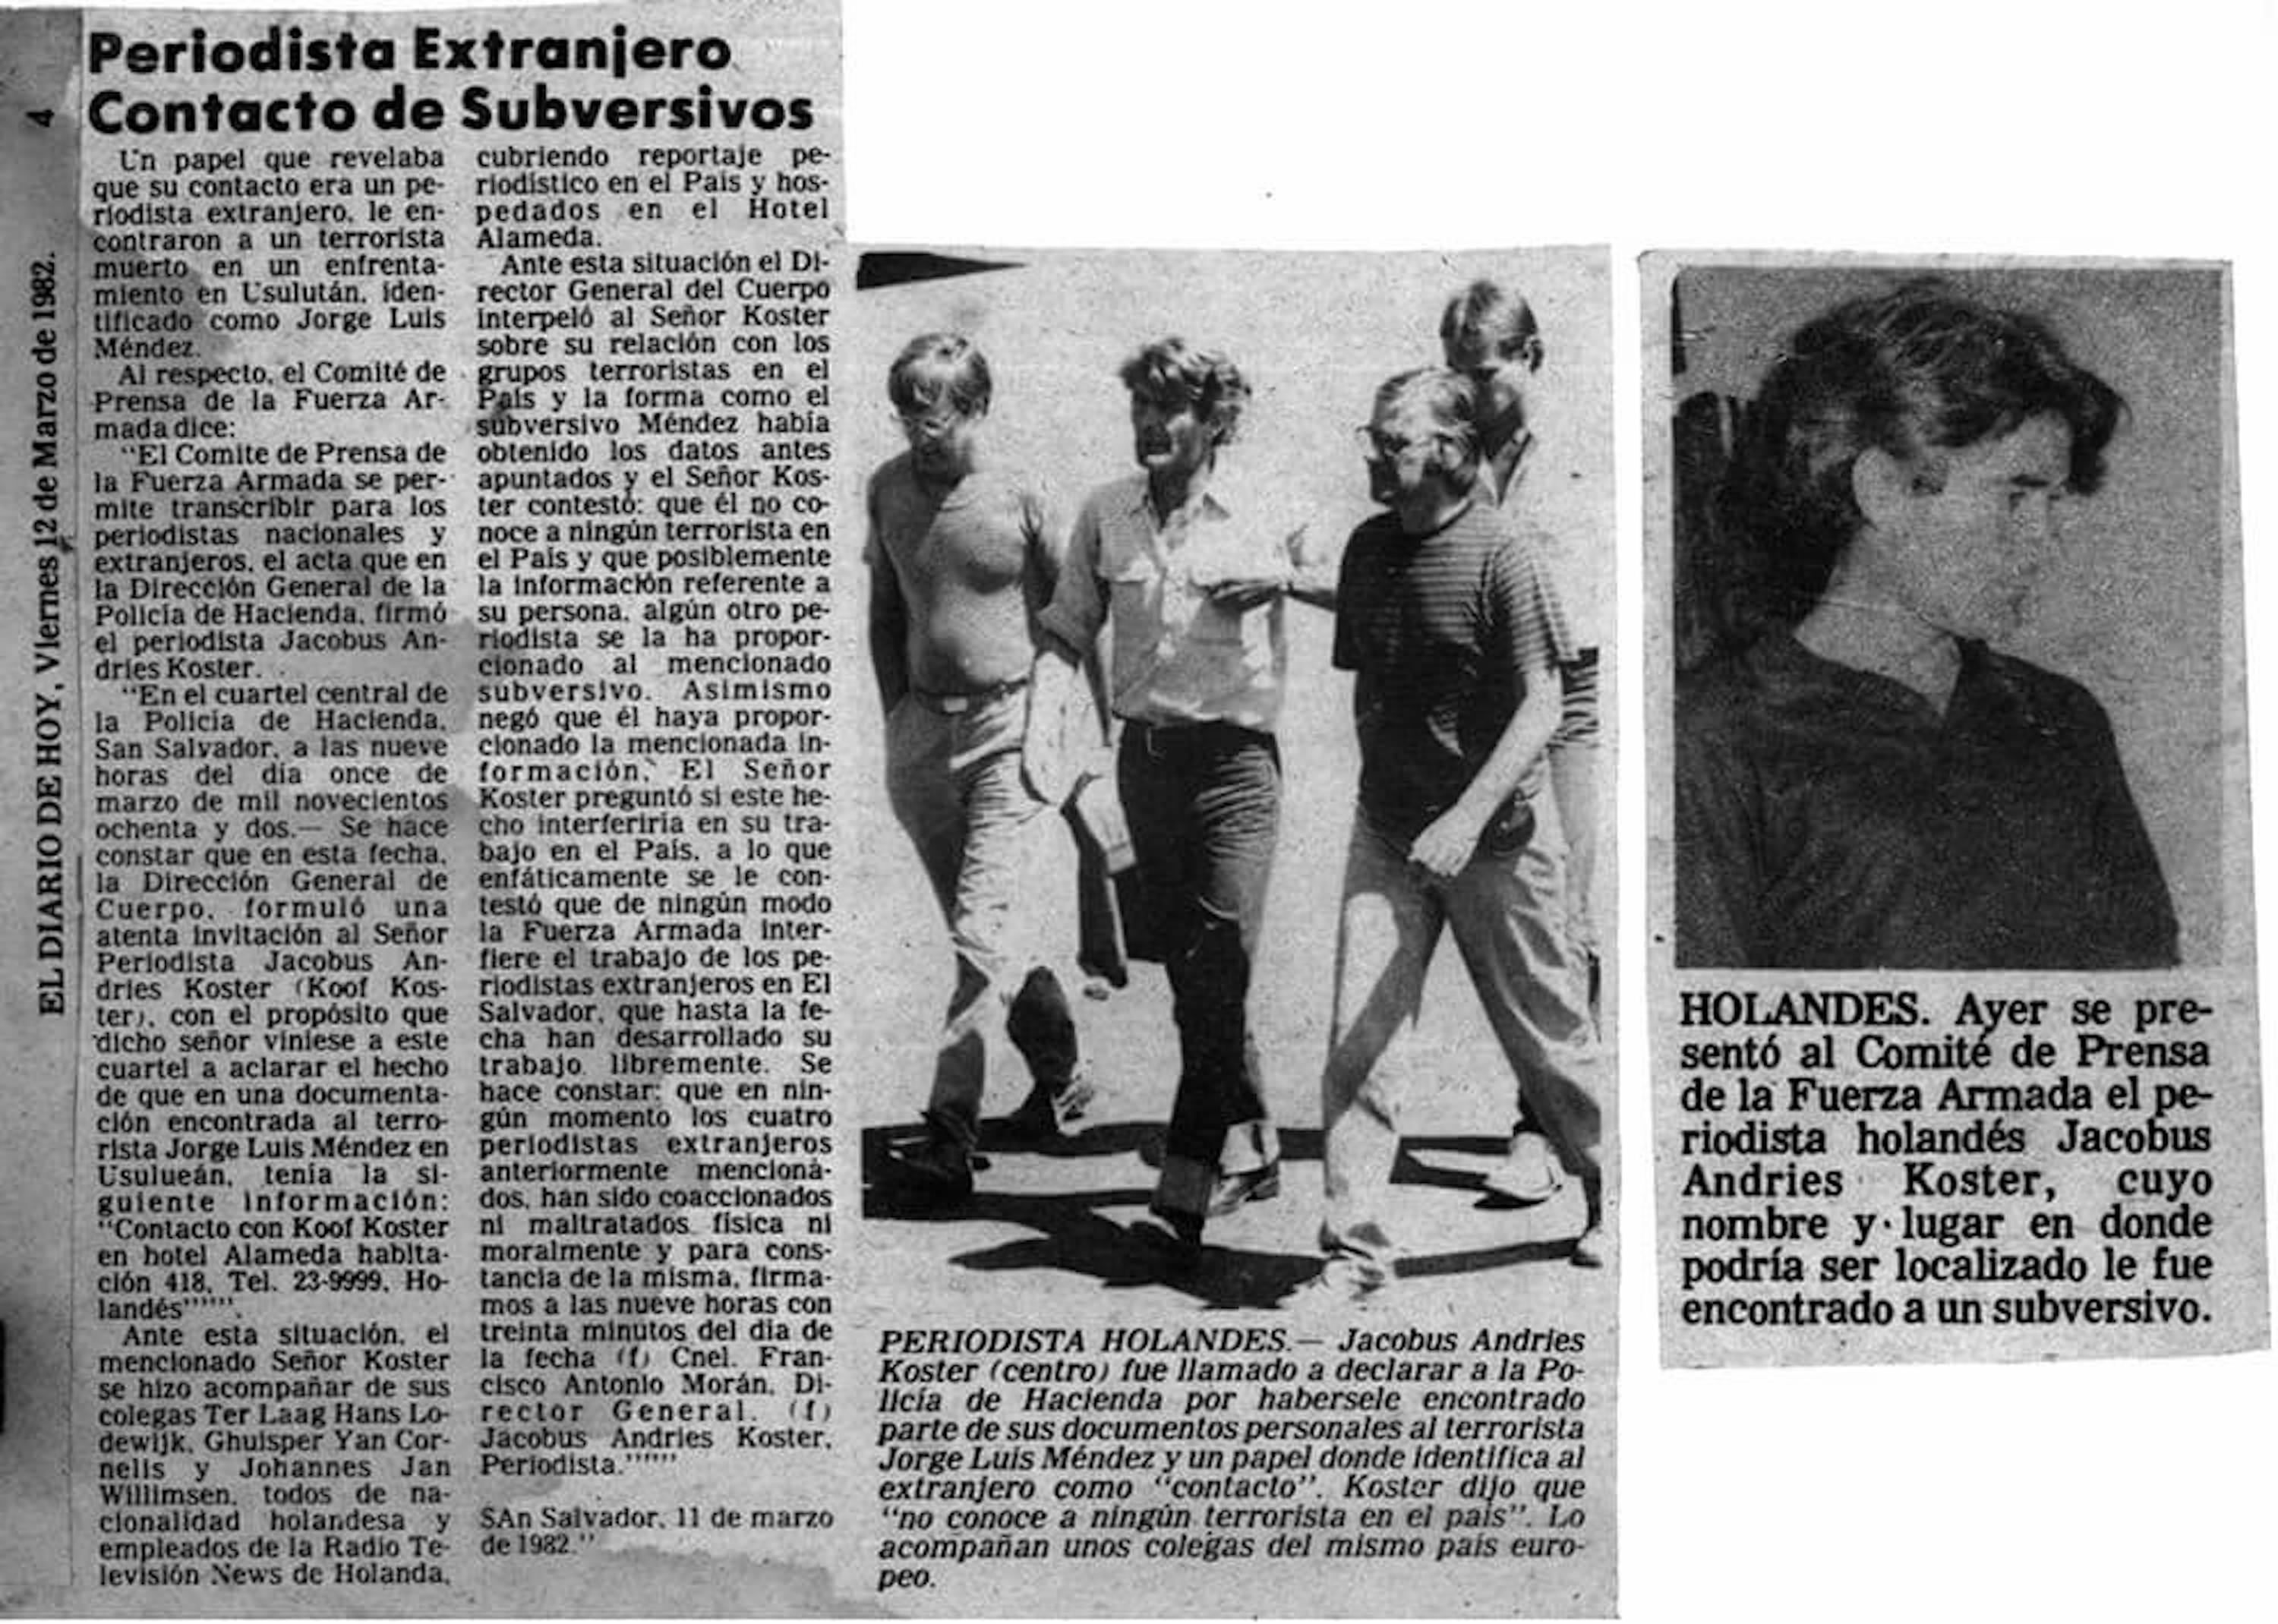 On March 12, 1982, El Diario de Hoy published an article titled: 